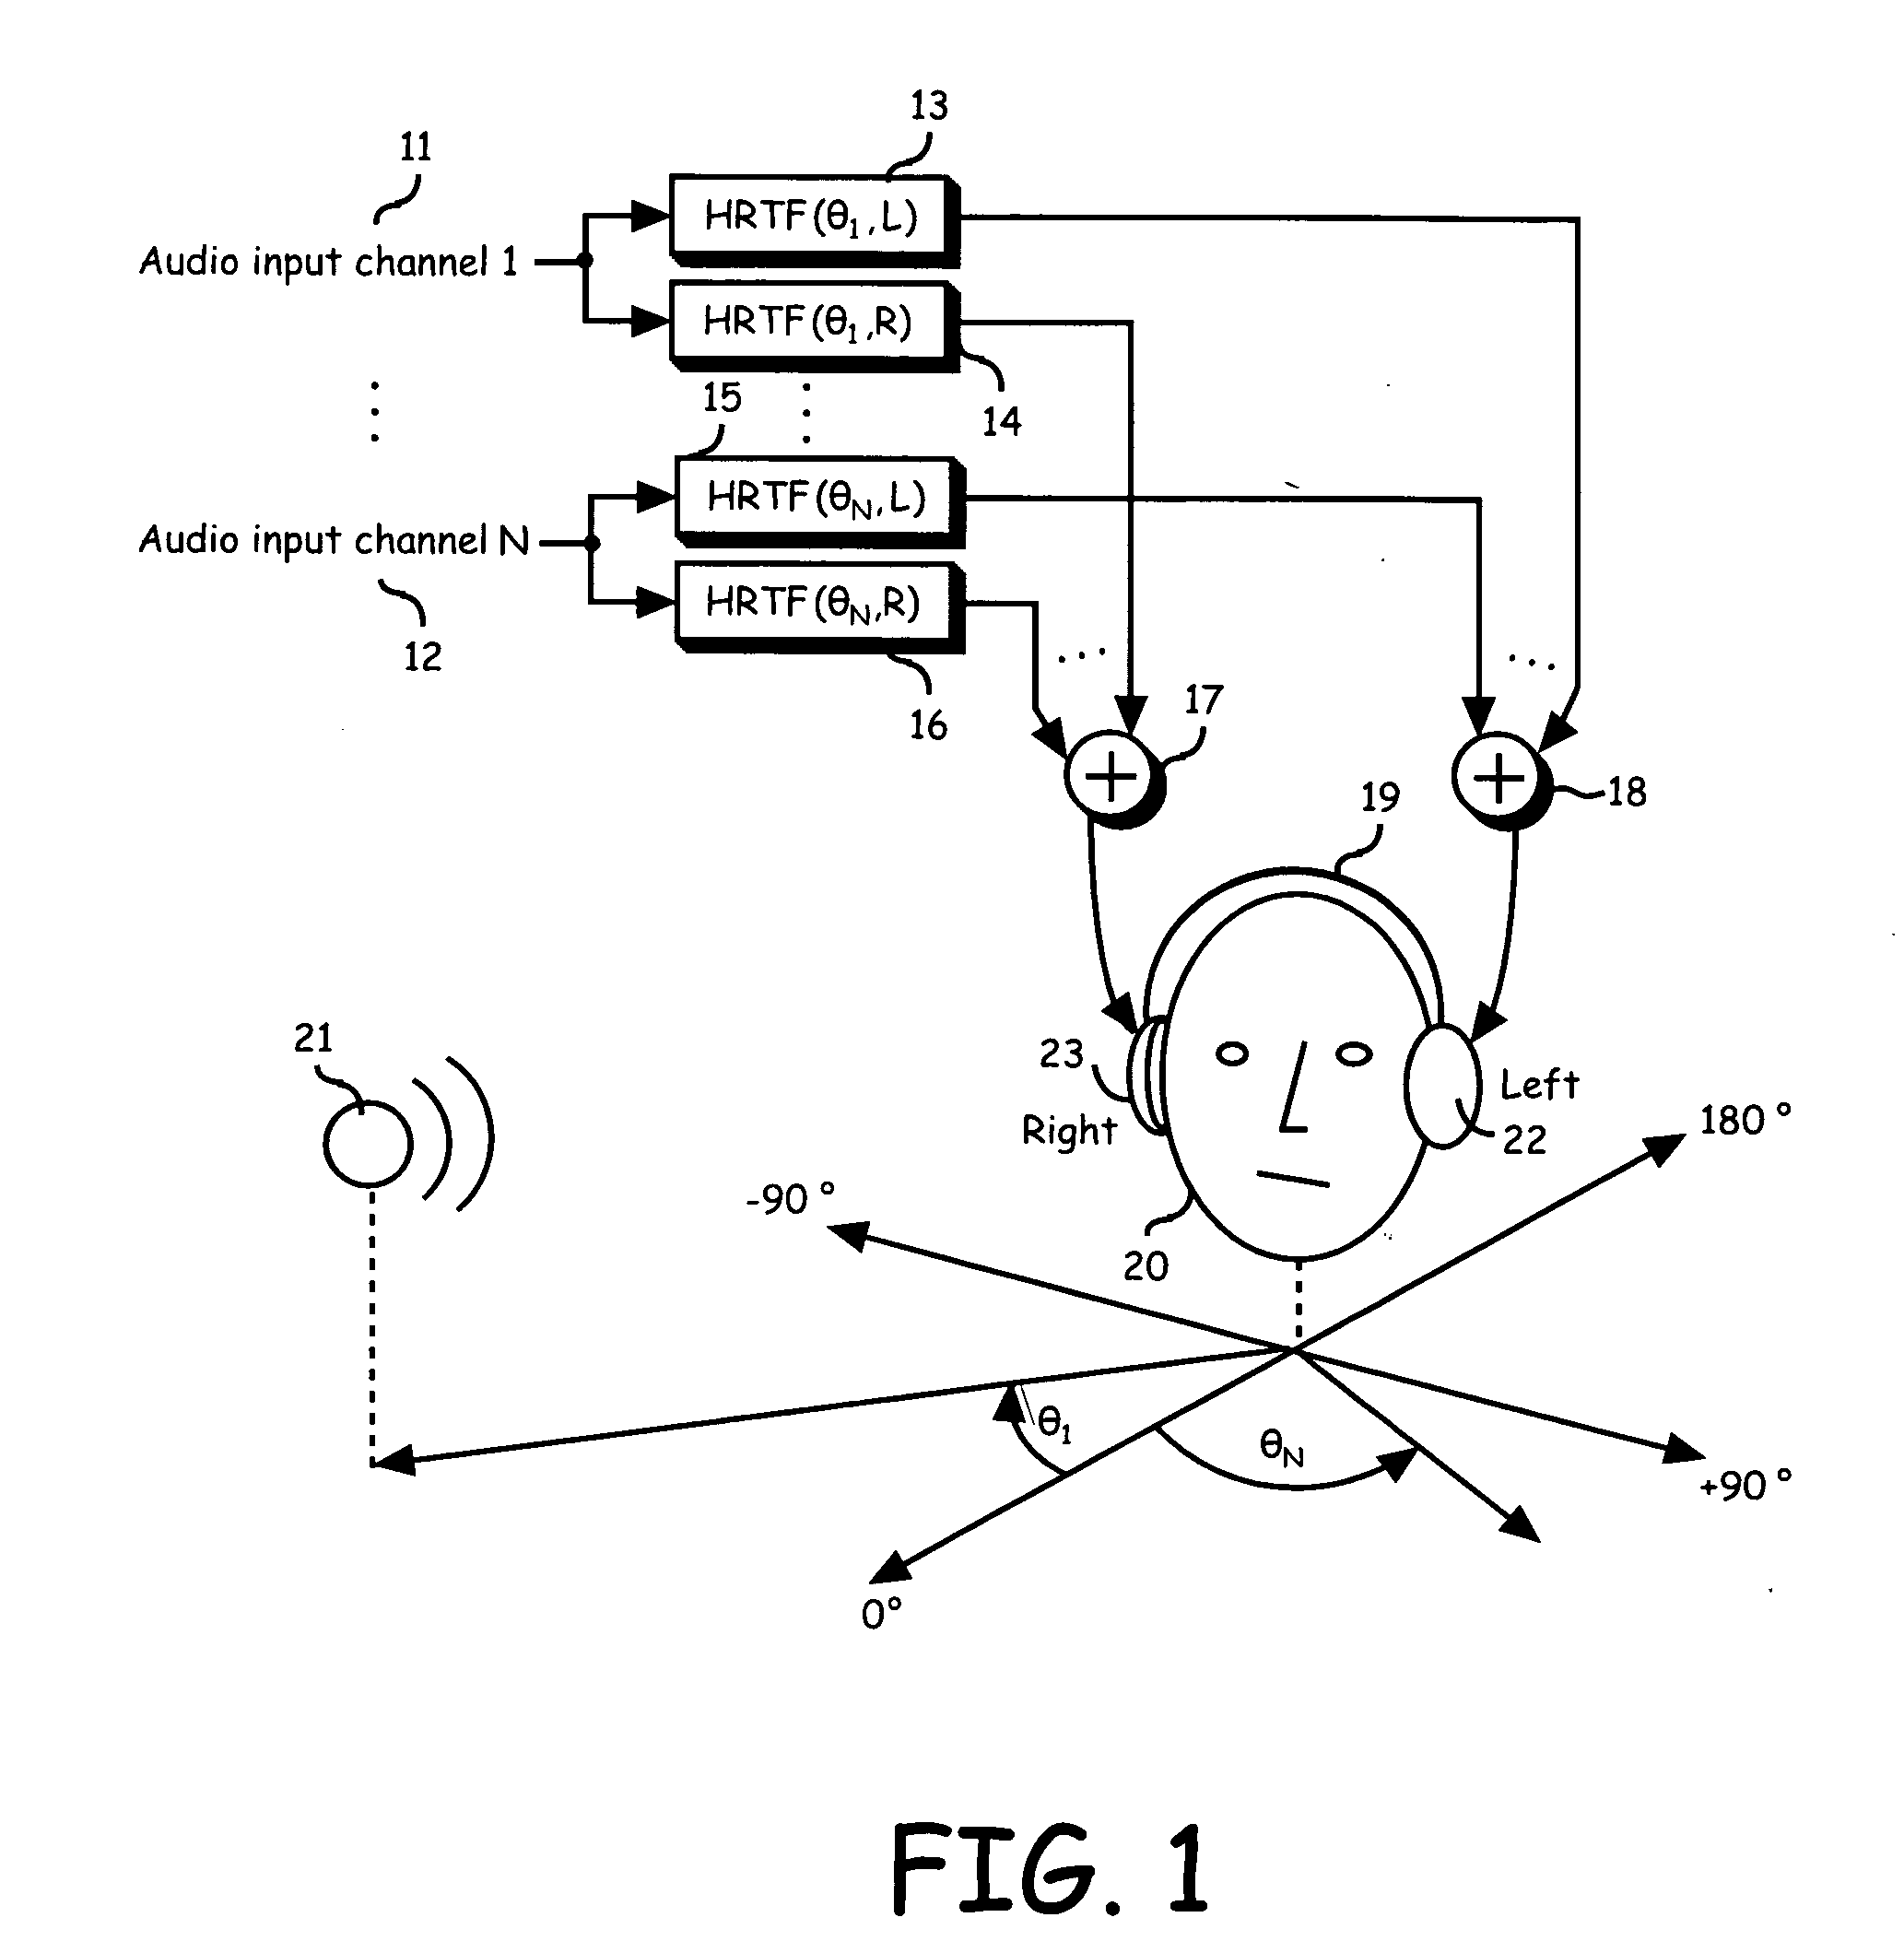 Head related transfer functions for panned stereo audio content